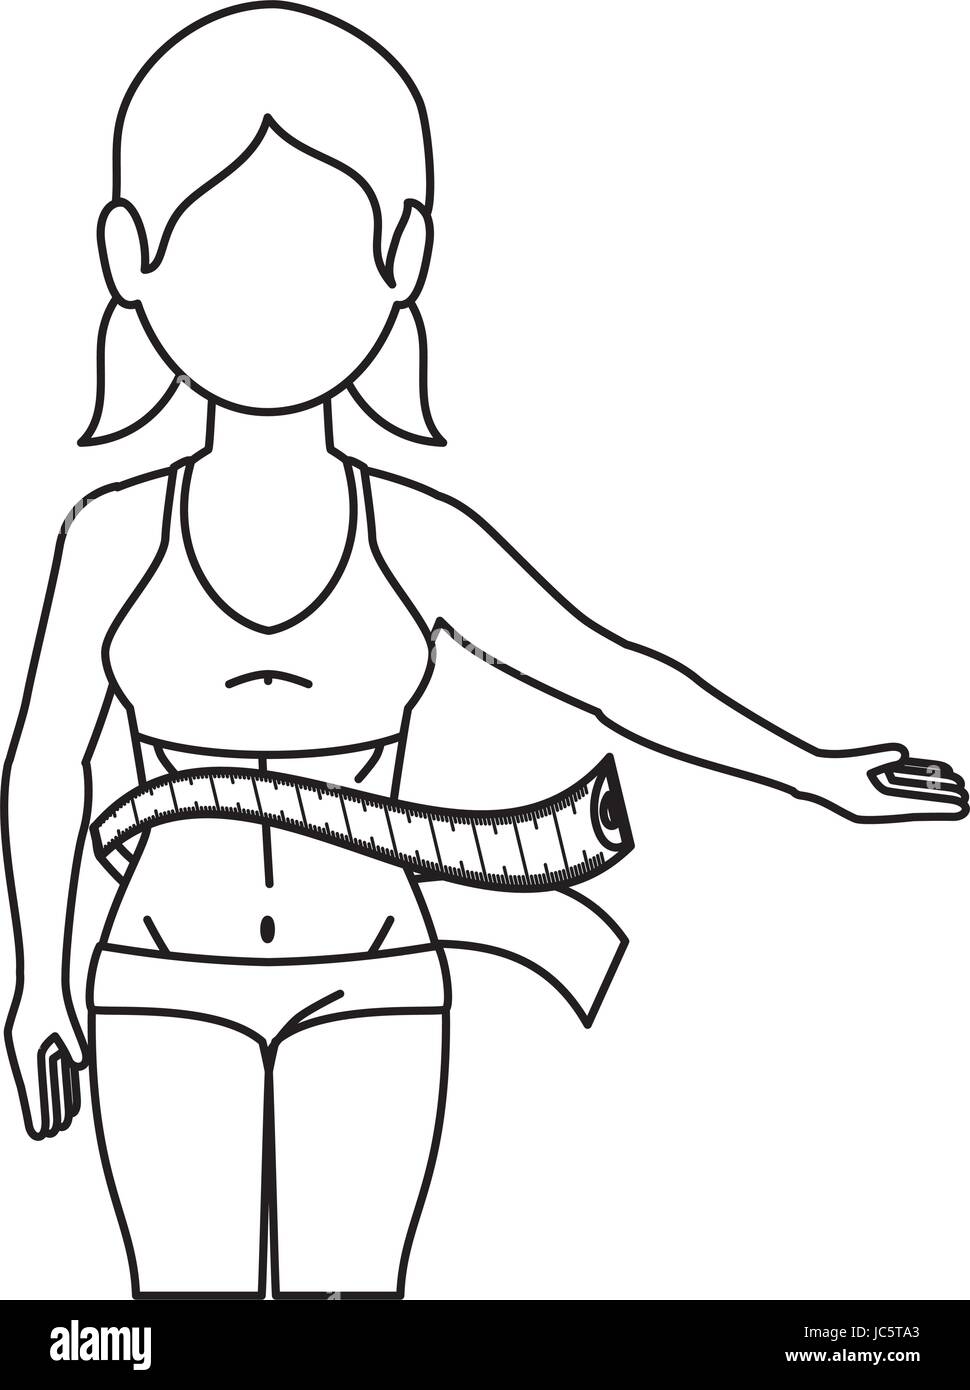 Illustration Of A Female Measuring Waist With Measuring Tape